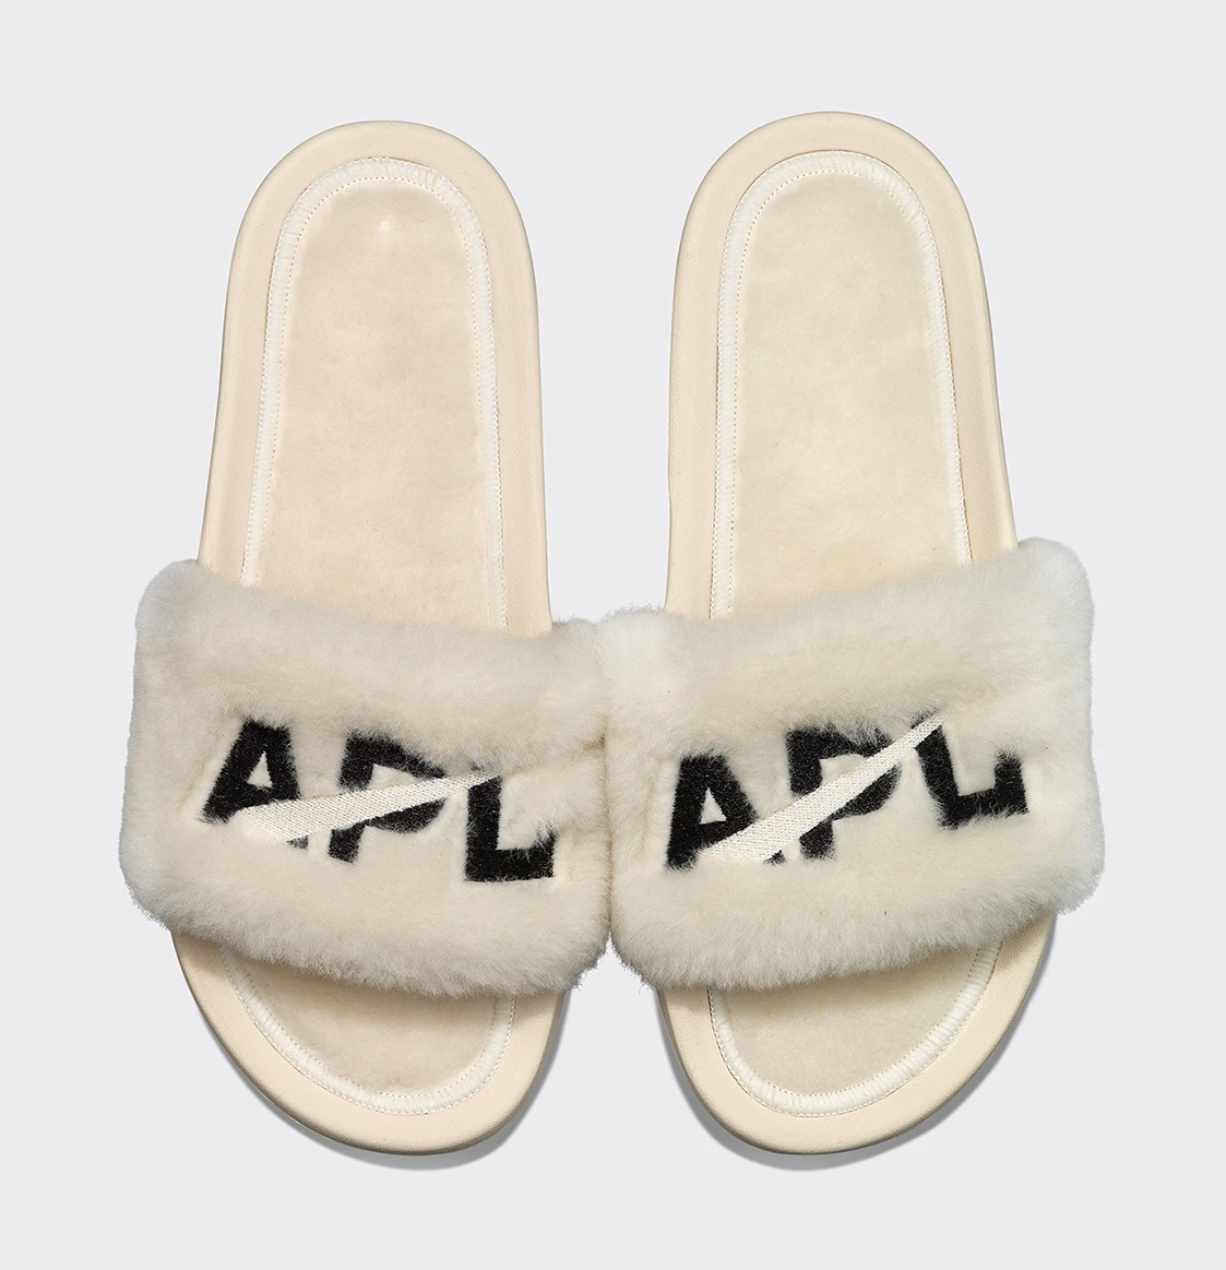 10 Fuzzy Slippers That Work as House Shoes or a Fashion Staple - FabFitFun